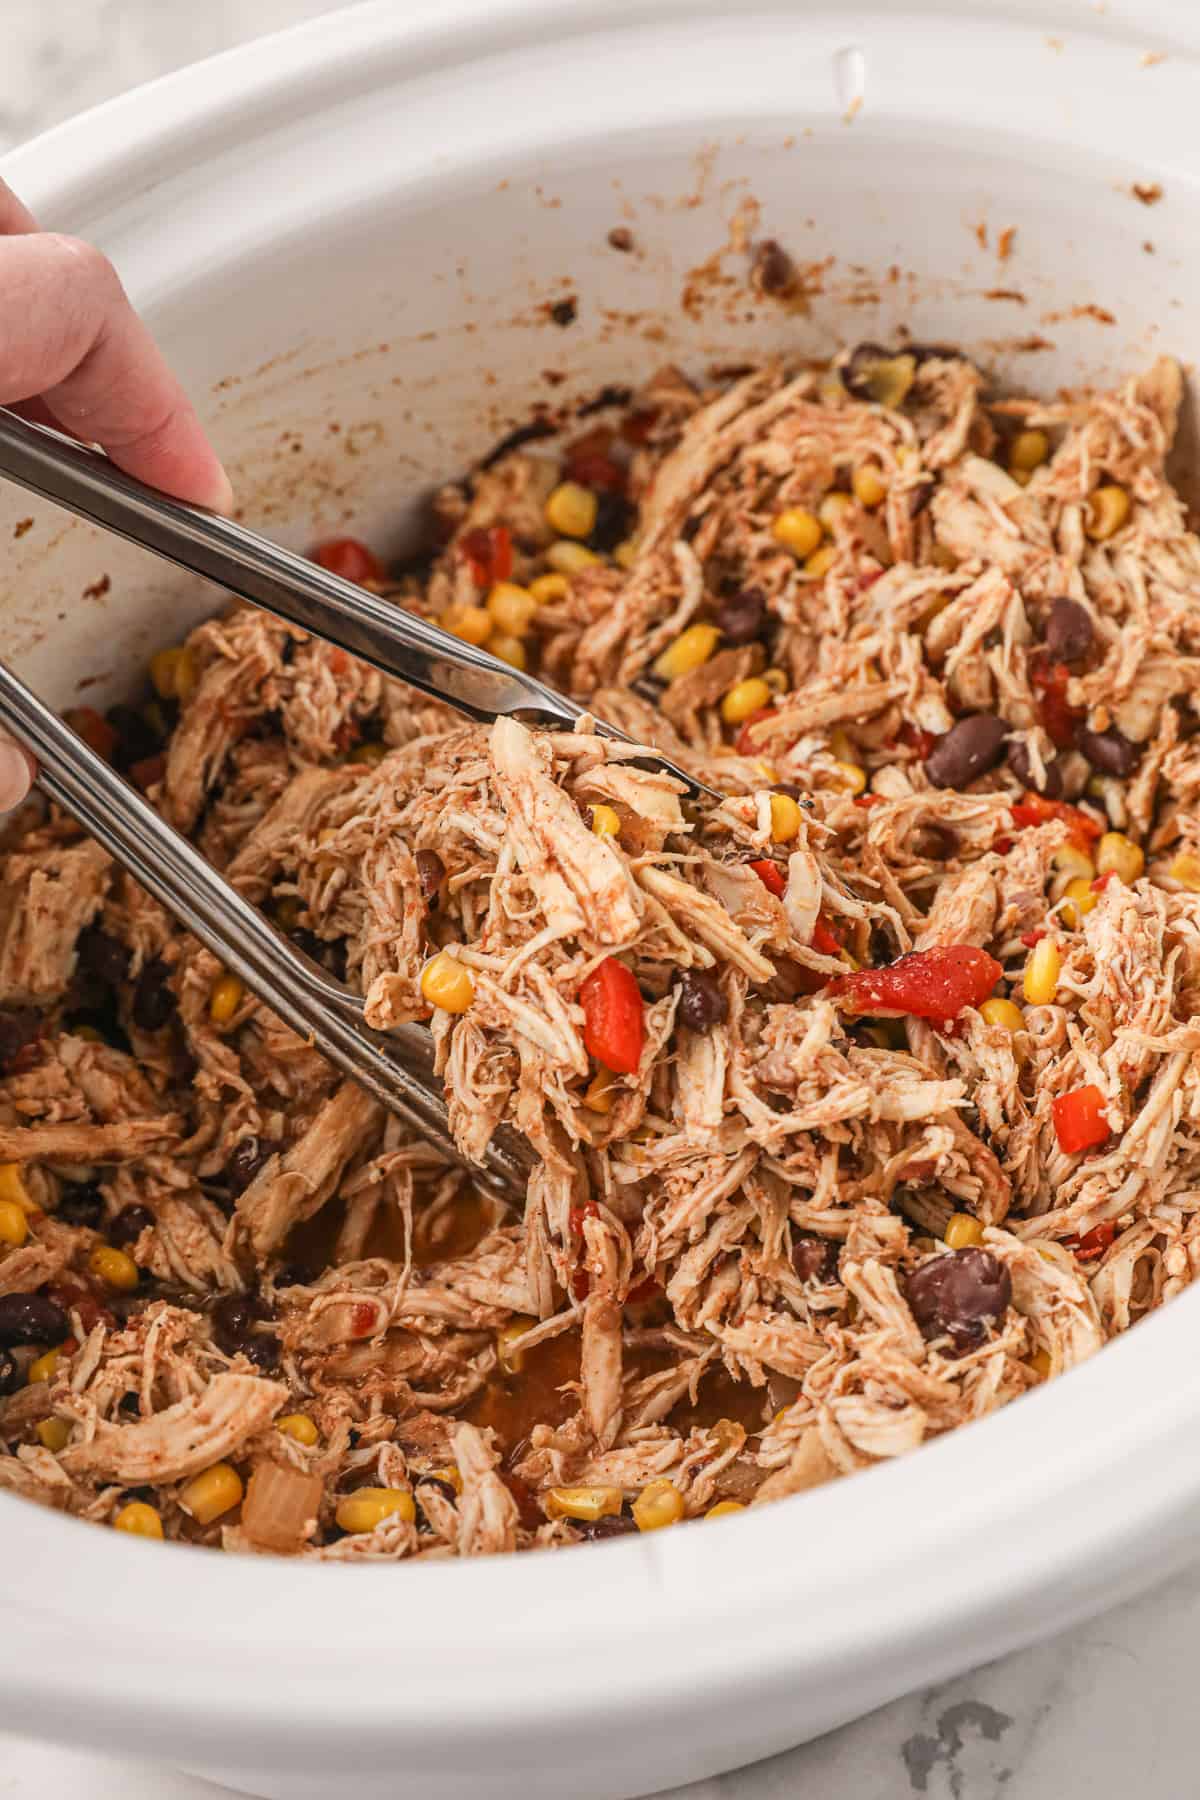 Metal tongs scooping shredded chicken out of a white slow cooker.